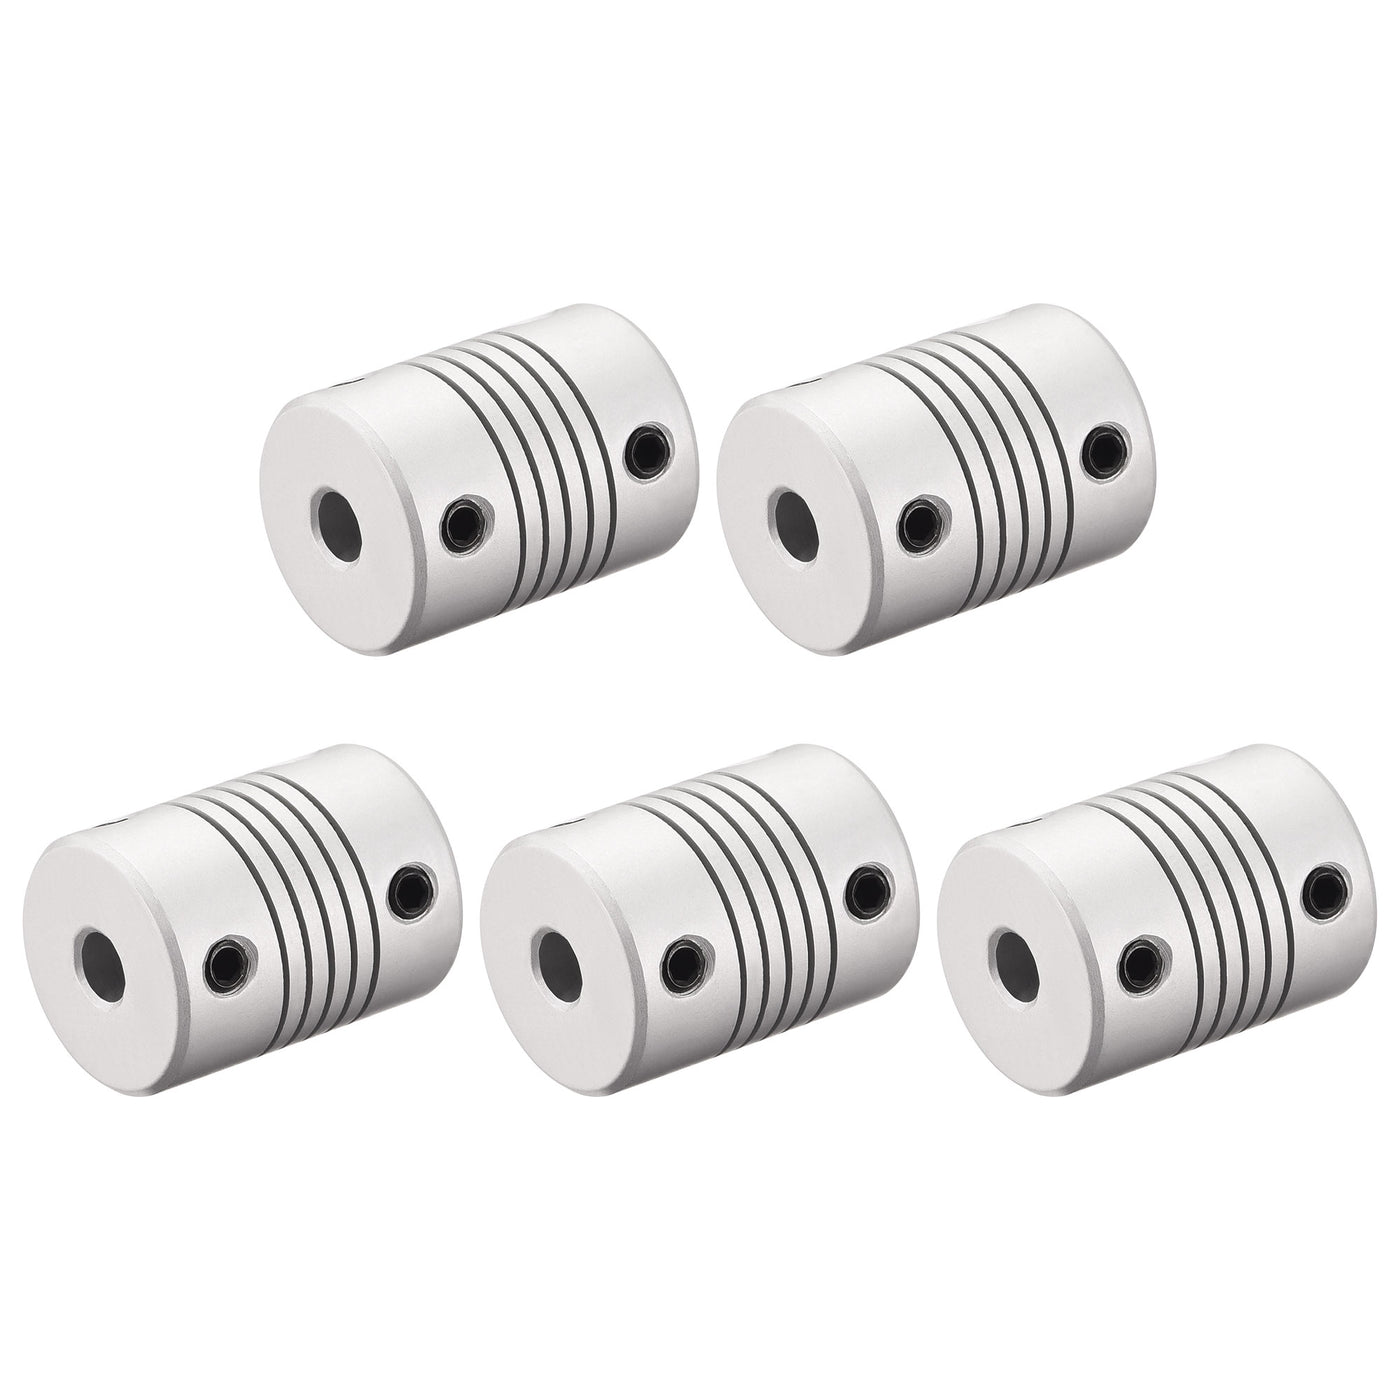 uxcell Uxcell 5mm to 6.35mm Aluminum Alloy Shaft Coupling Flexible Coupler L25xD19 Silver,5pcs